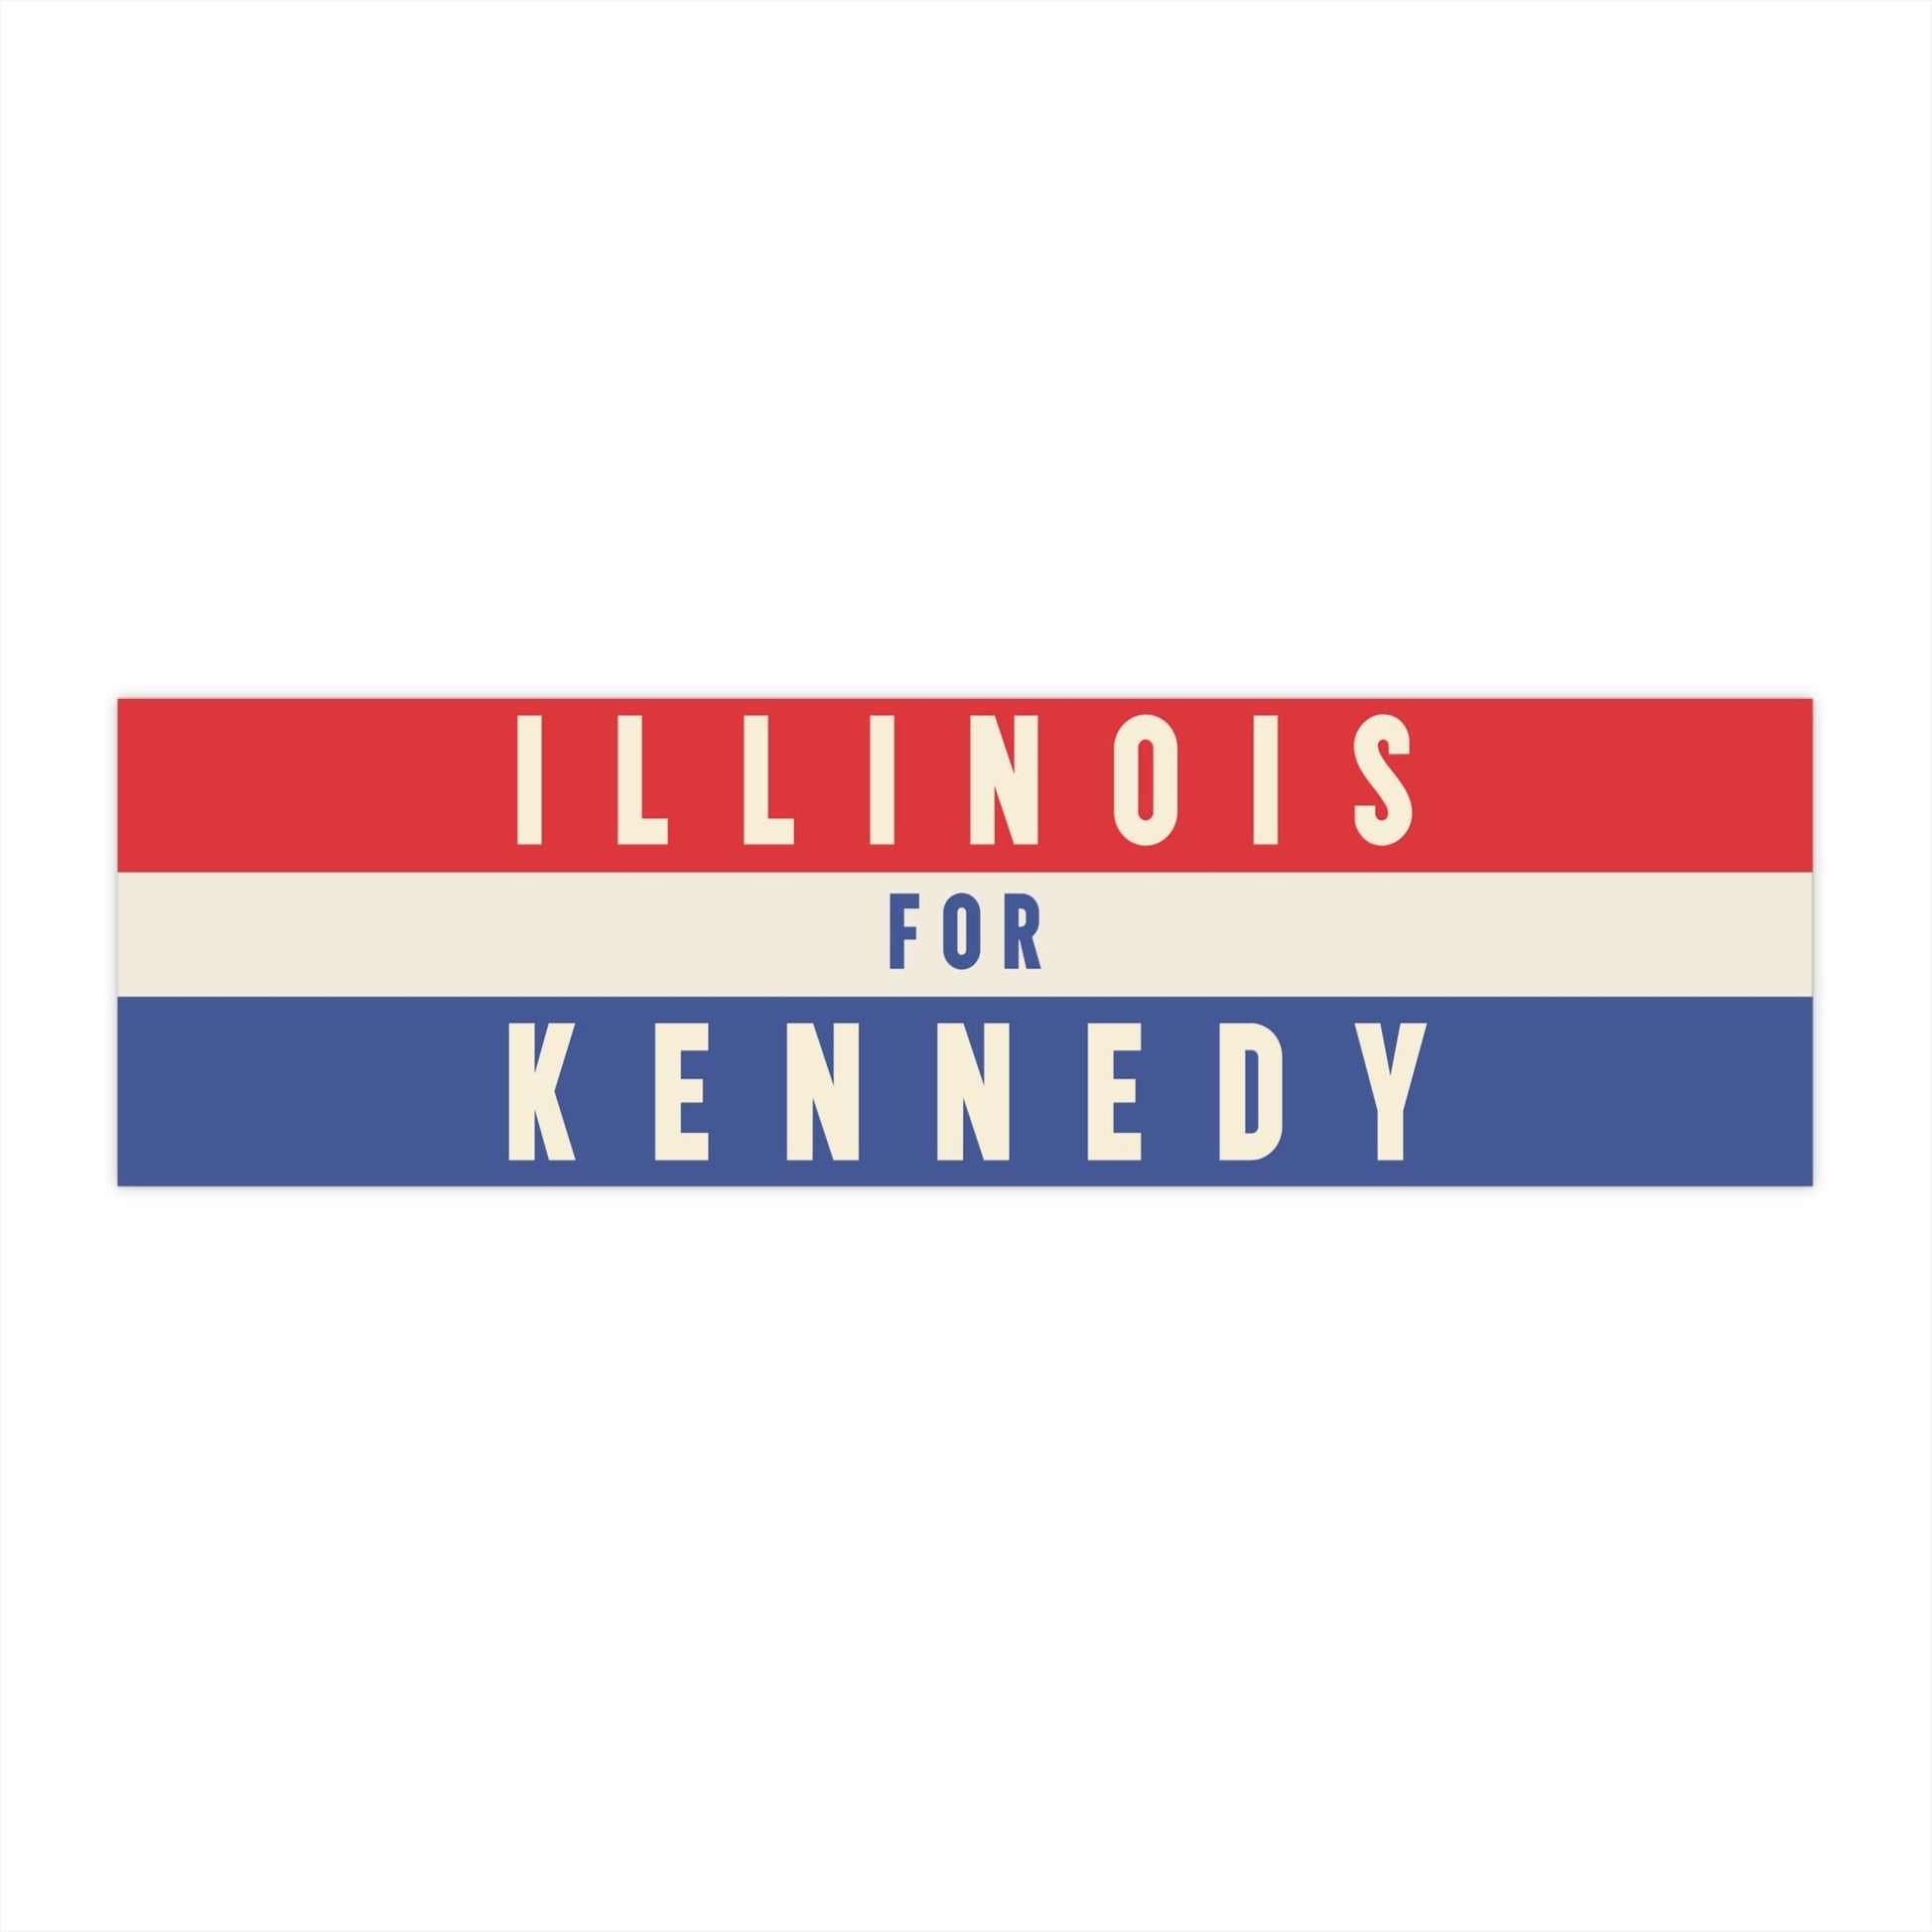 Illinois for Kennedy Bumper Sticker - TEAM KENNEDY. All rights reserved